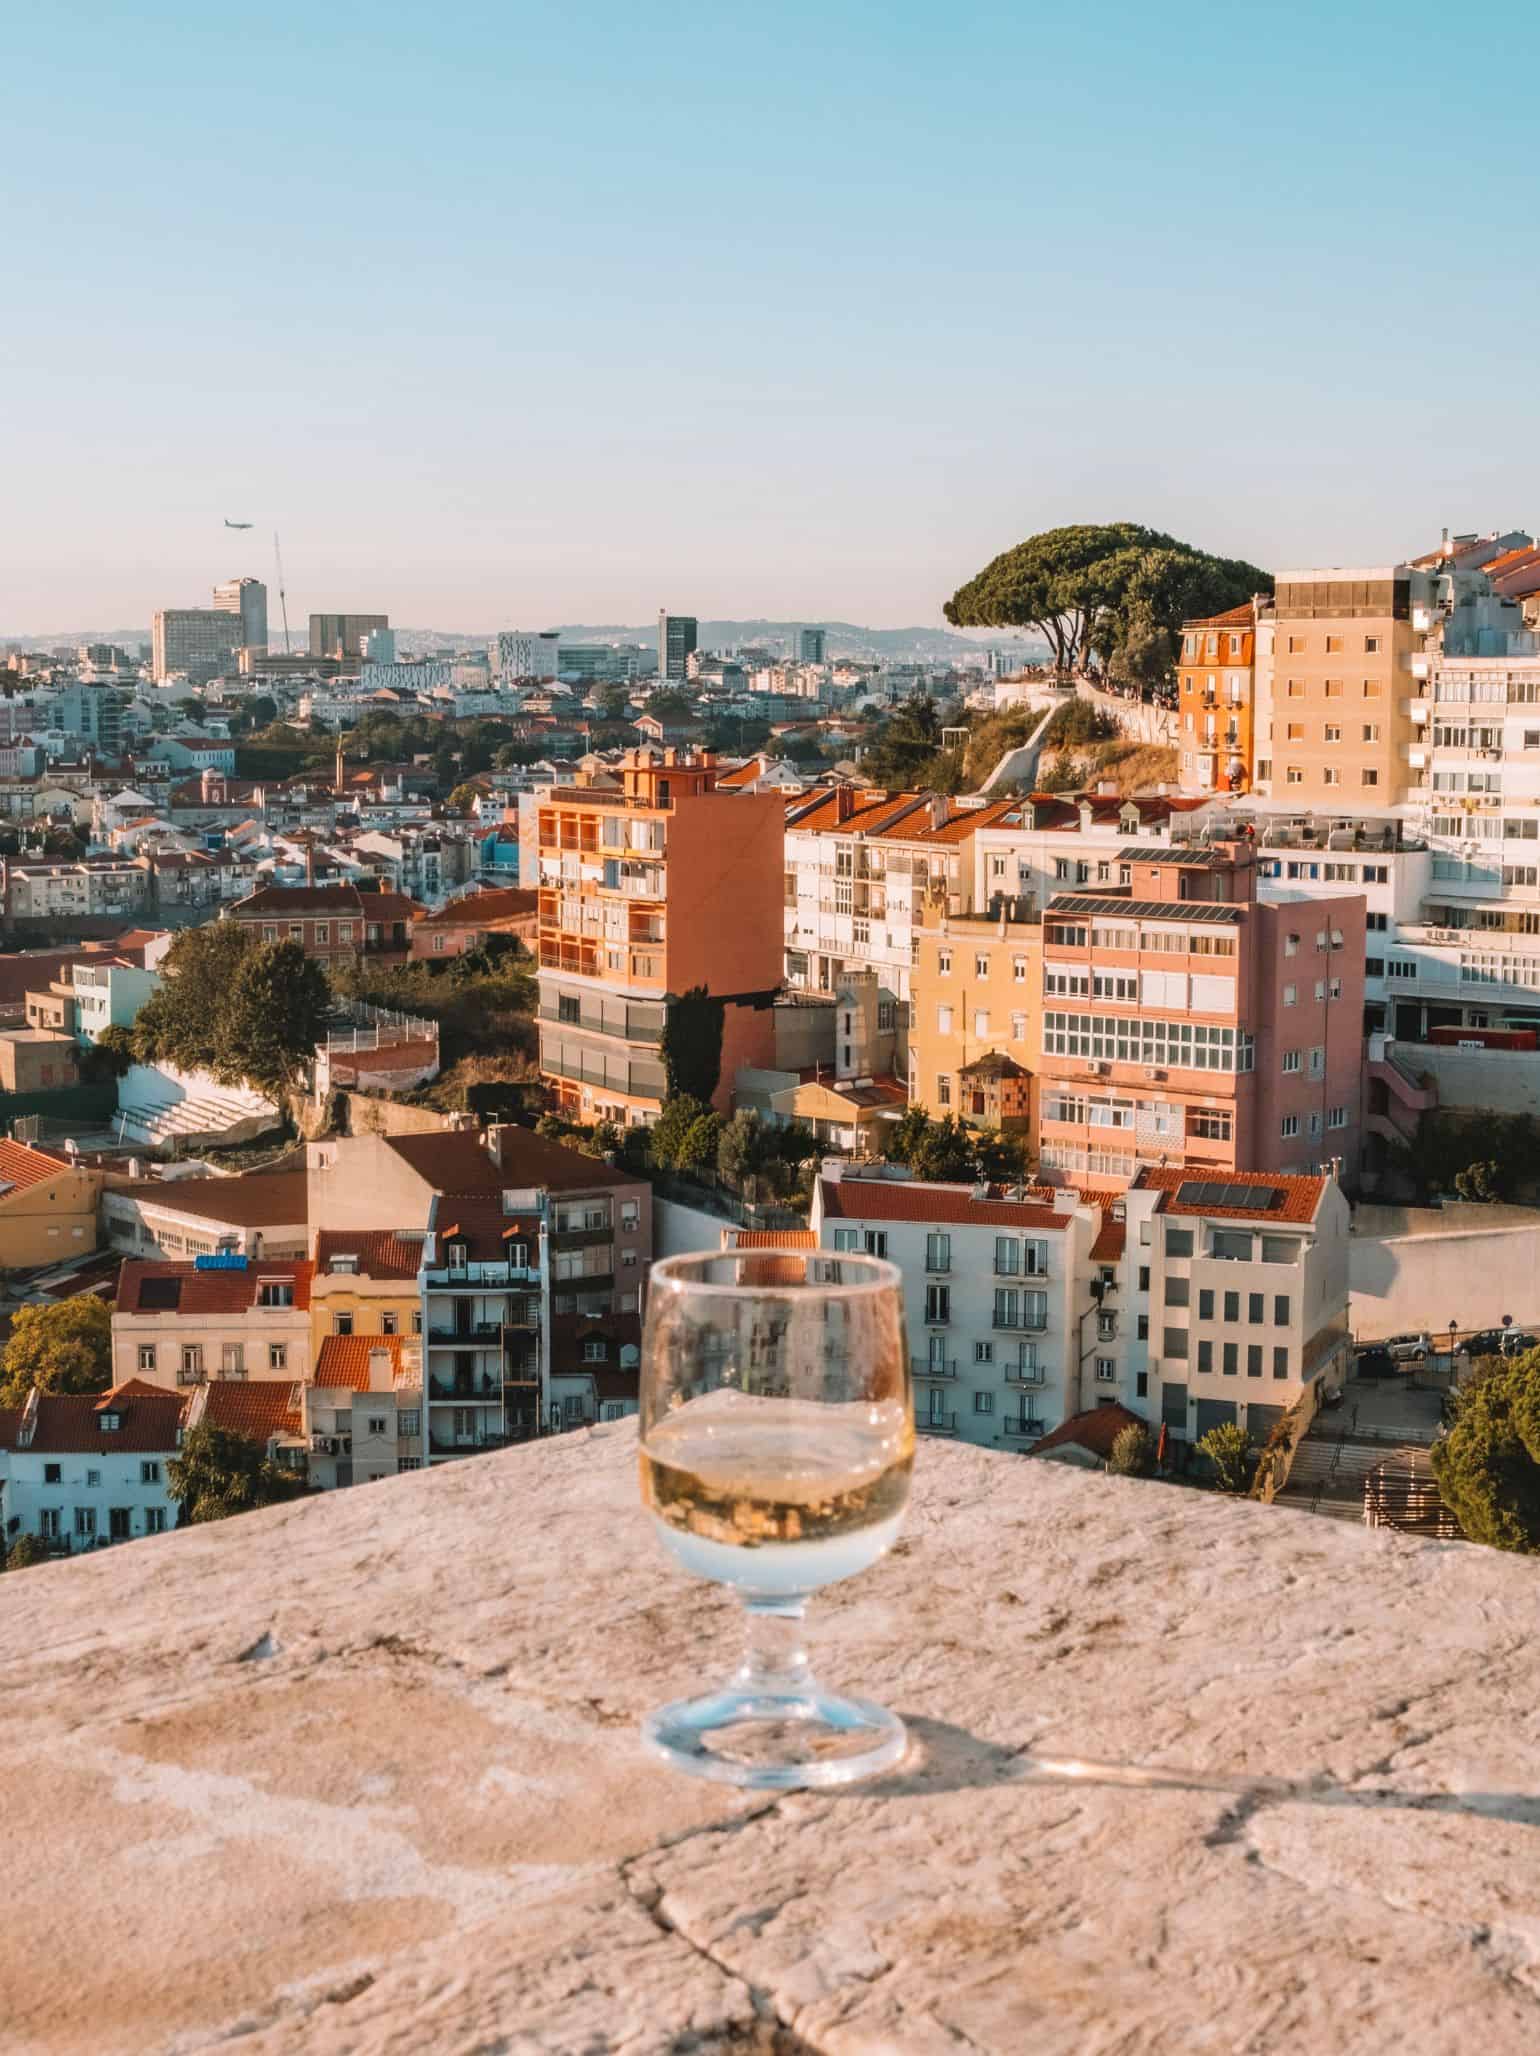 Views from The Church of our Lady of Grace, a hidden gem in Lisbon. Is Lisbon worth visiting? The viewpoints say yes! 